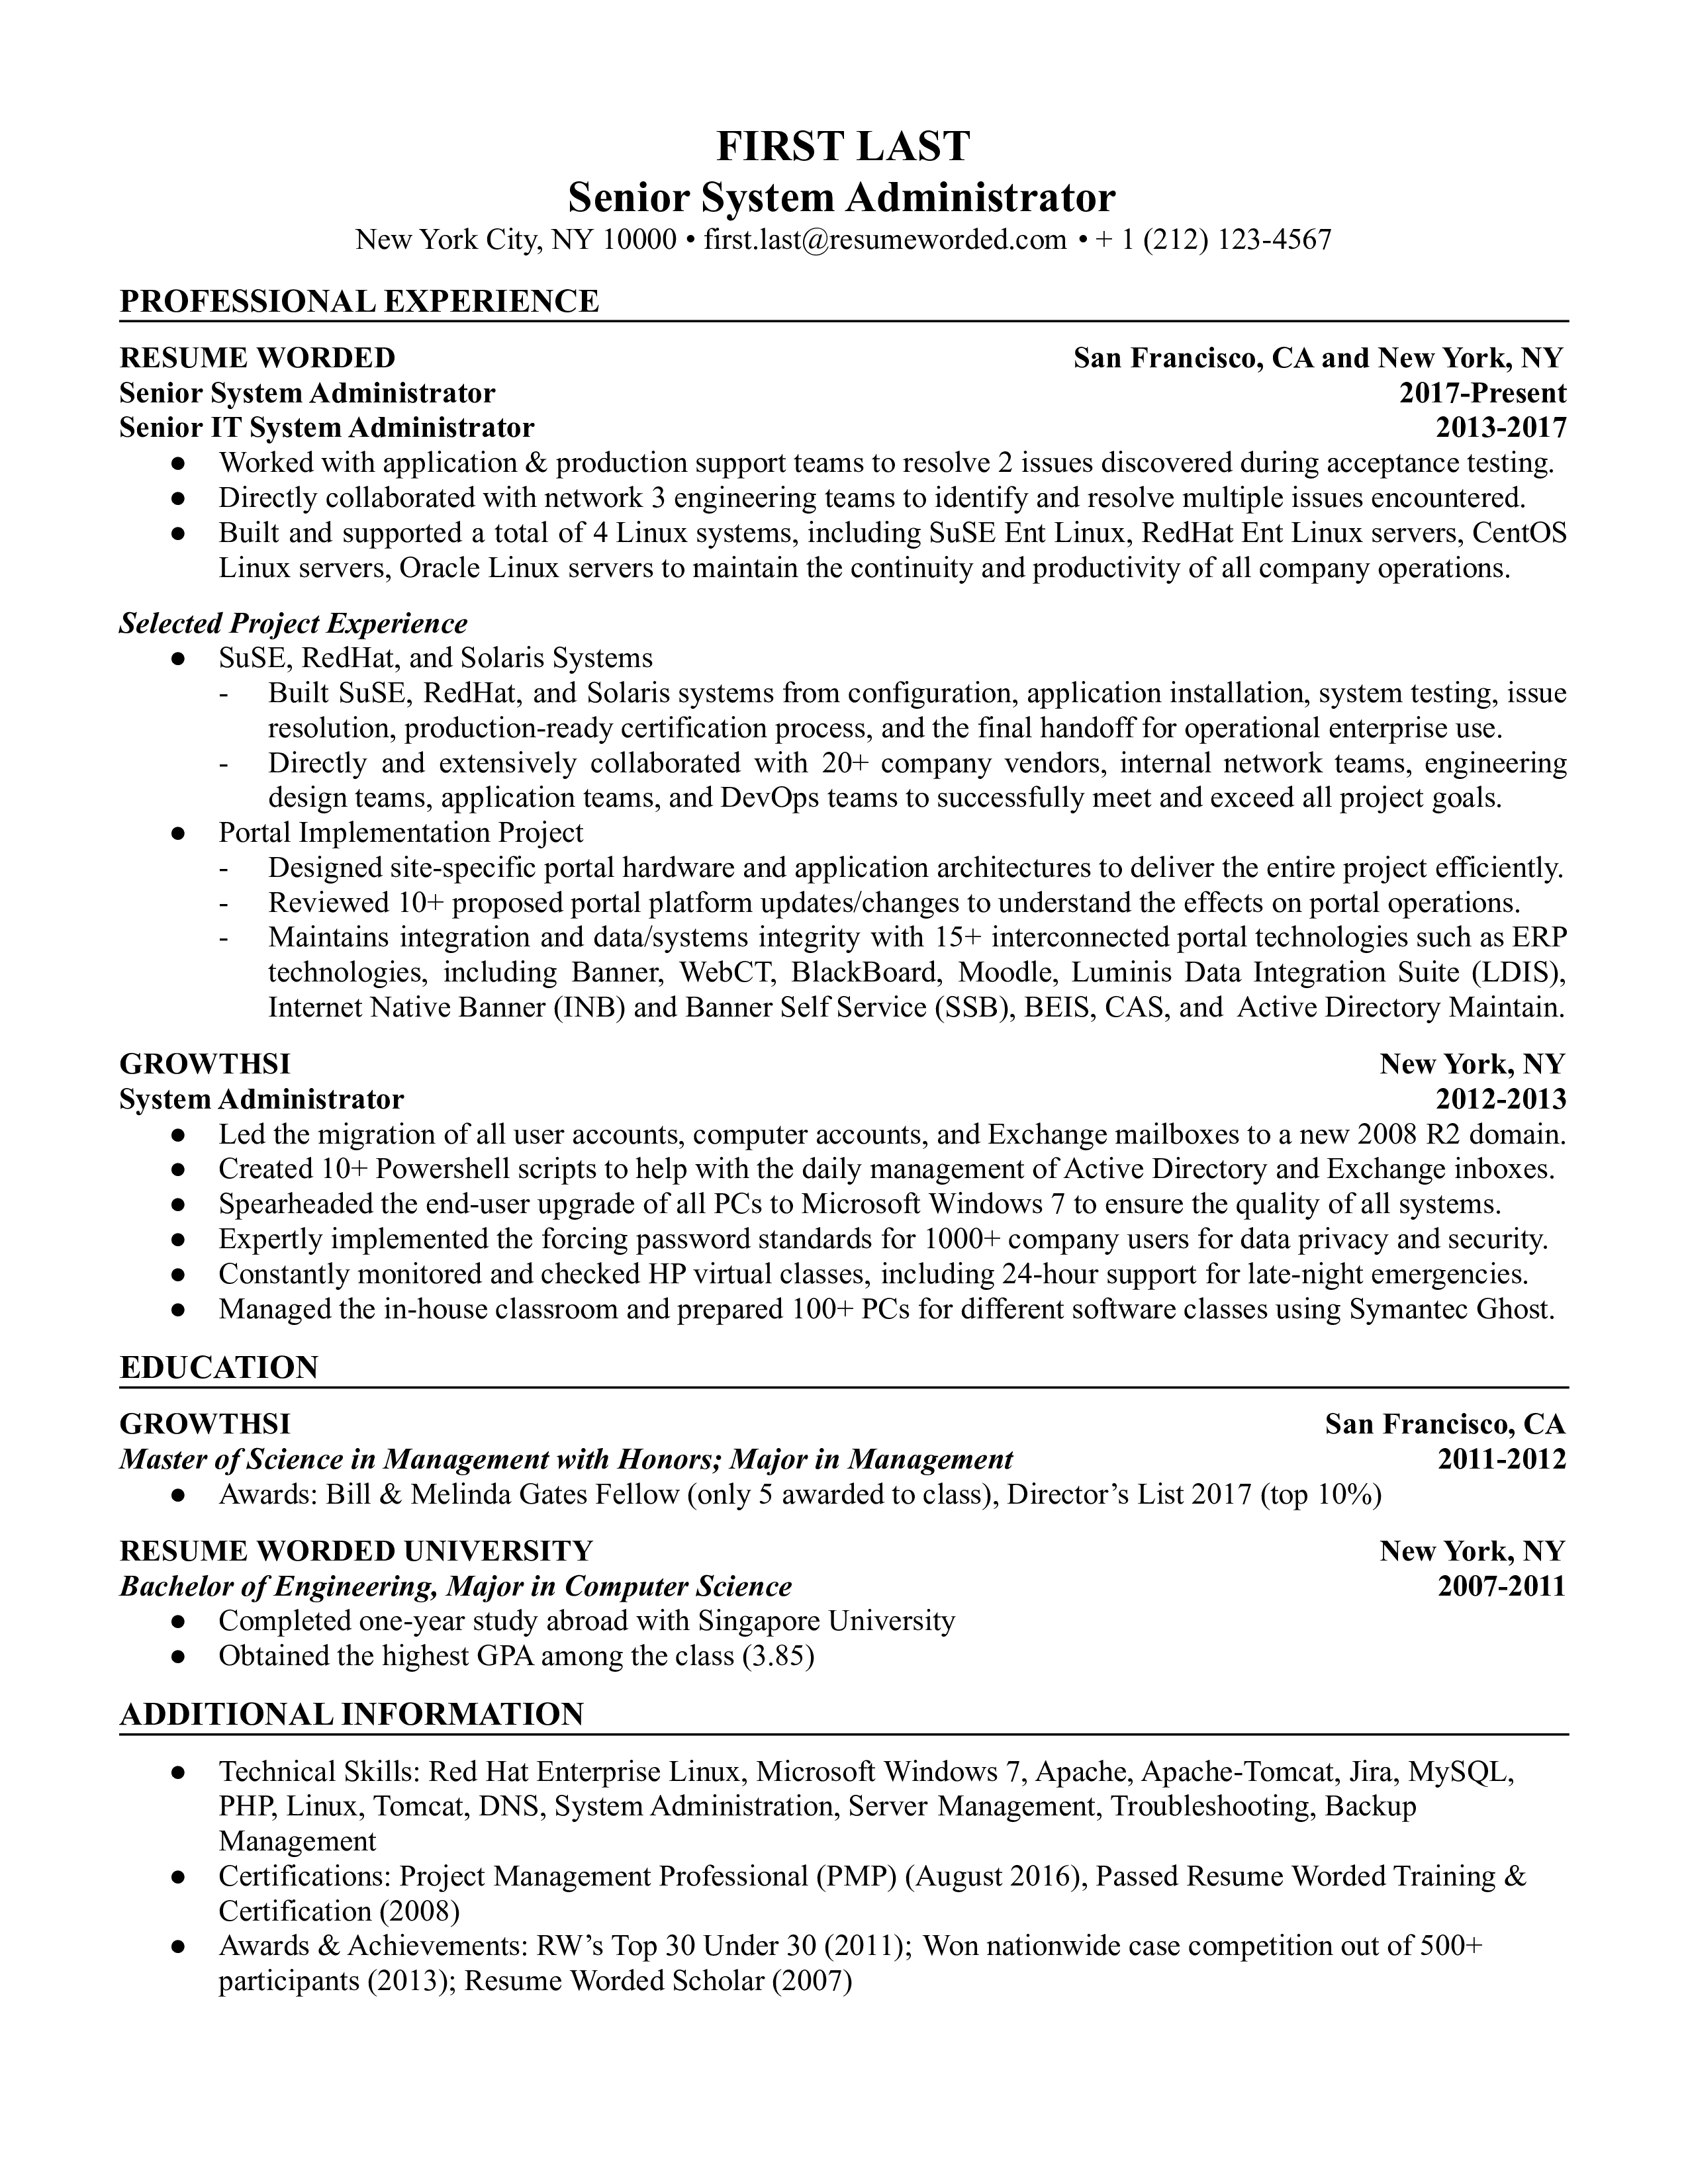 A Senior System Administrator resume showcasing extensive experience in managing and maintaining complex computer systems, providing technical support, and ensuring high availability and security of networks.